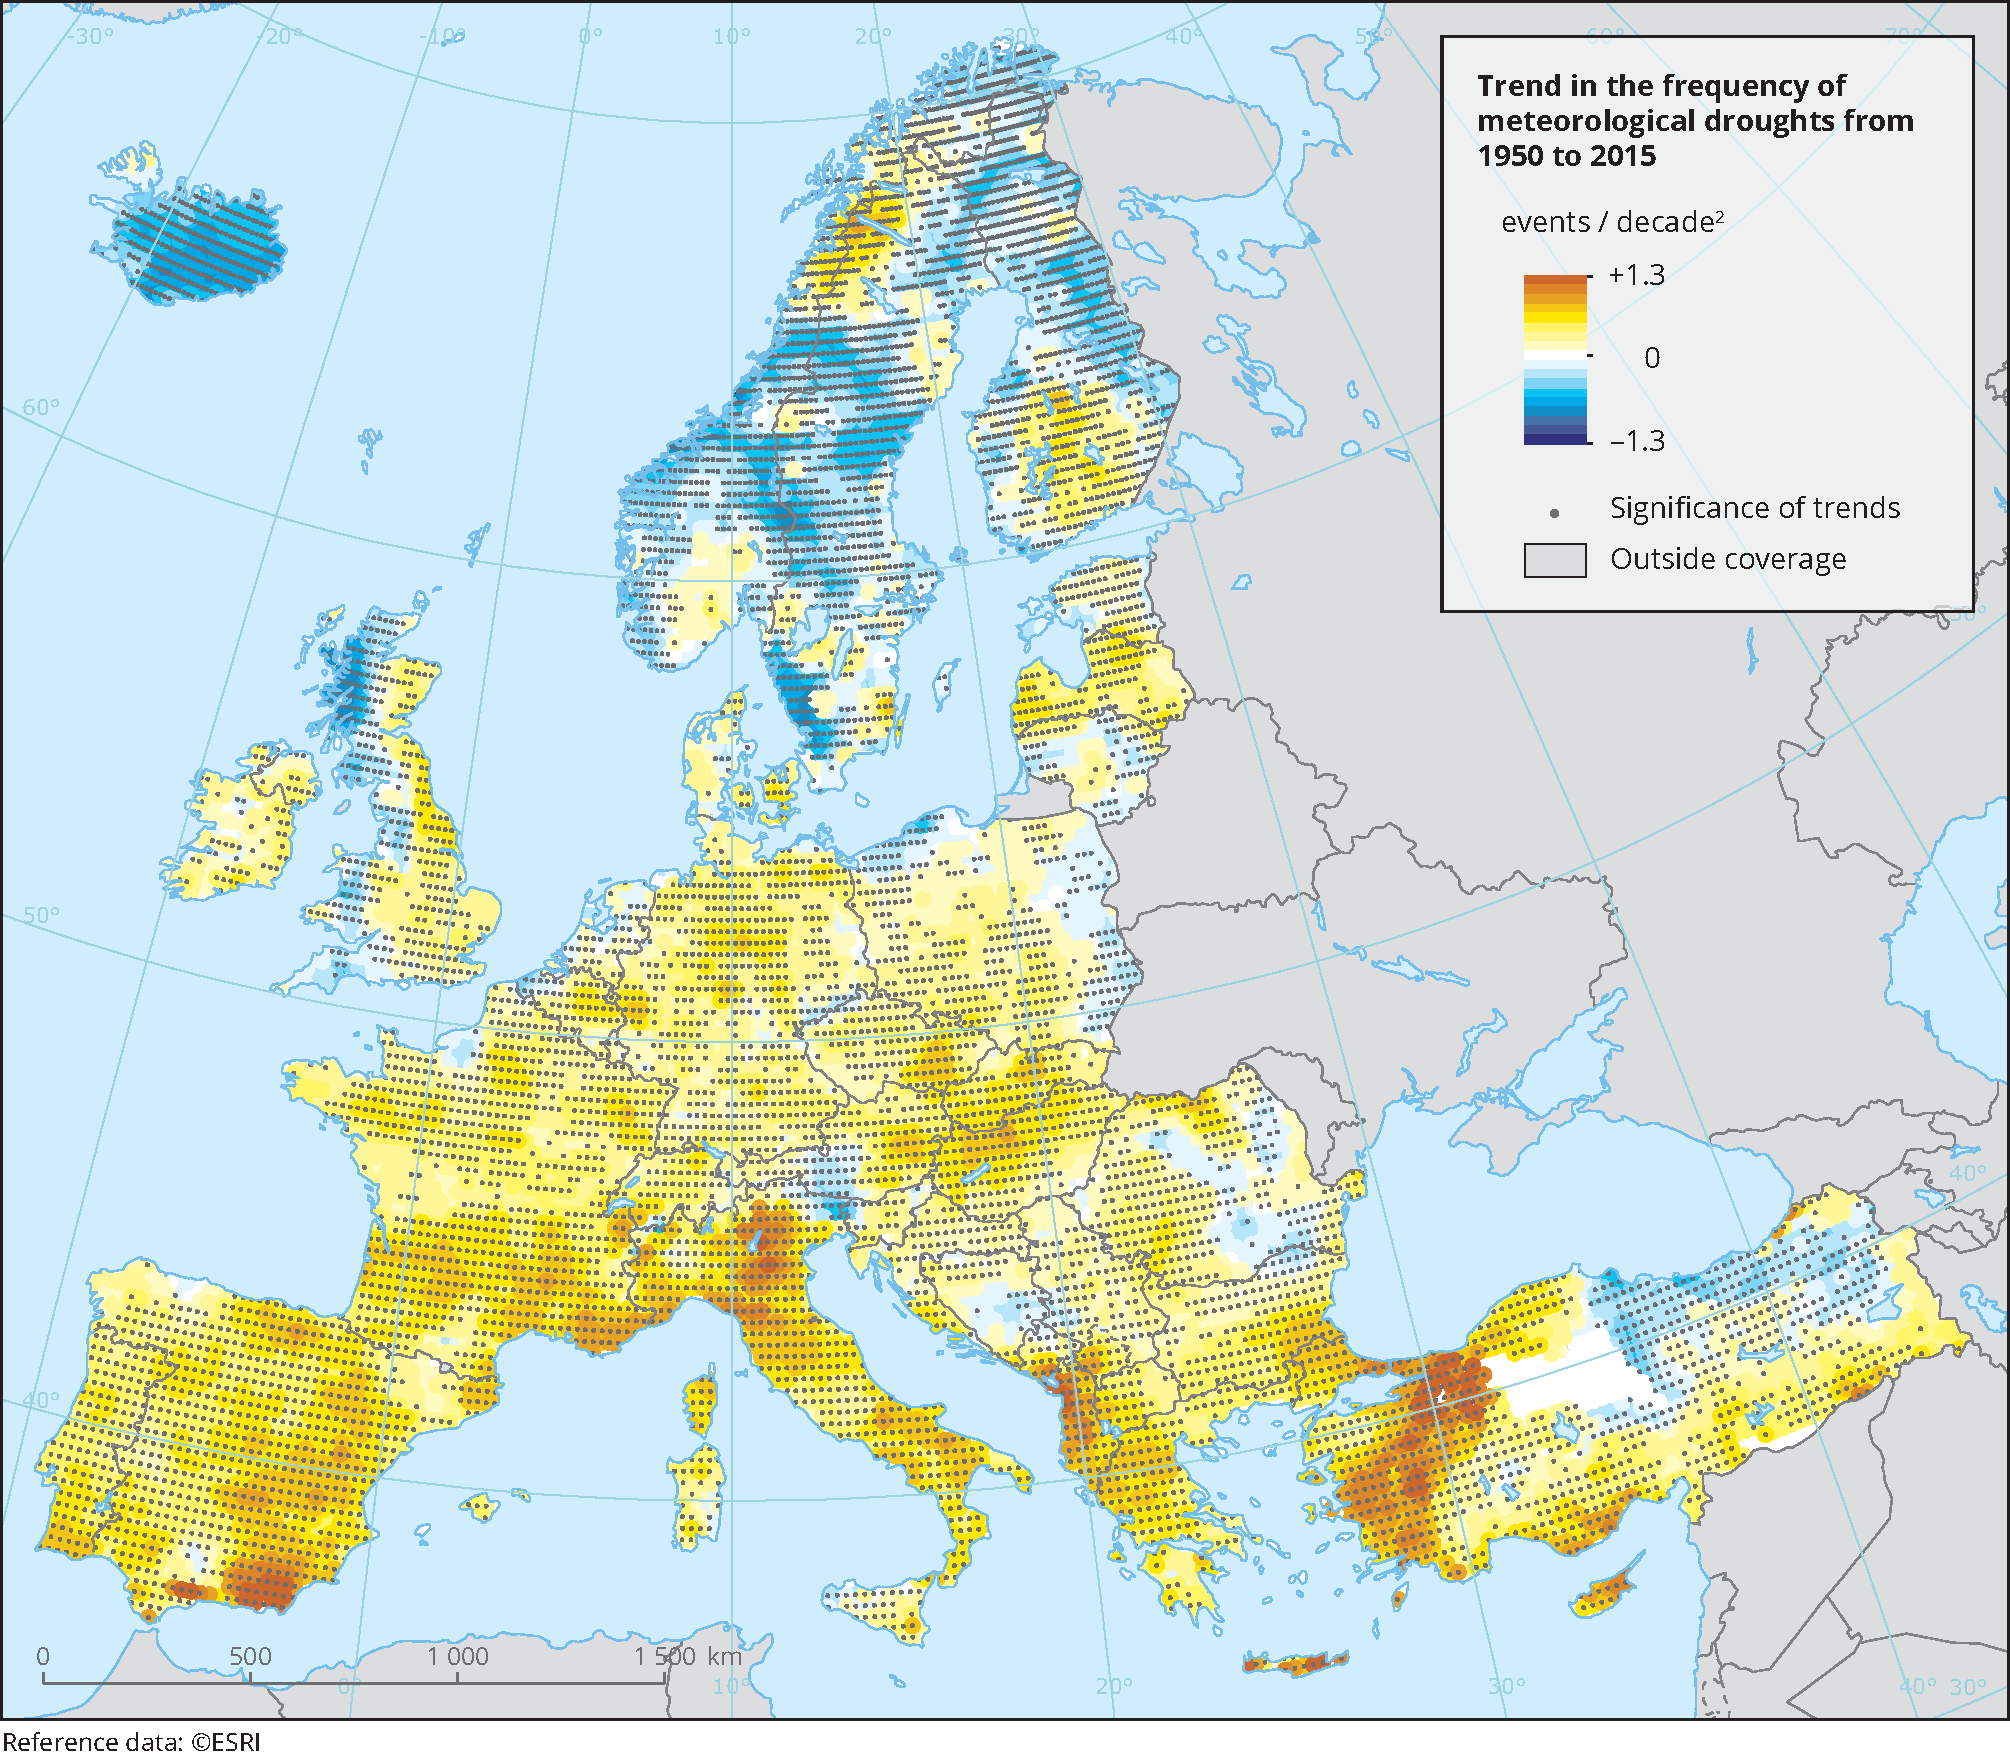 Trend in the frequency of meteorological droughts in Europe (1950-2015)